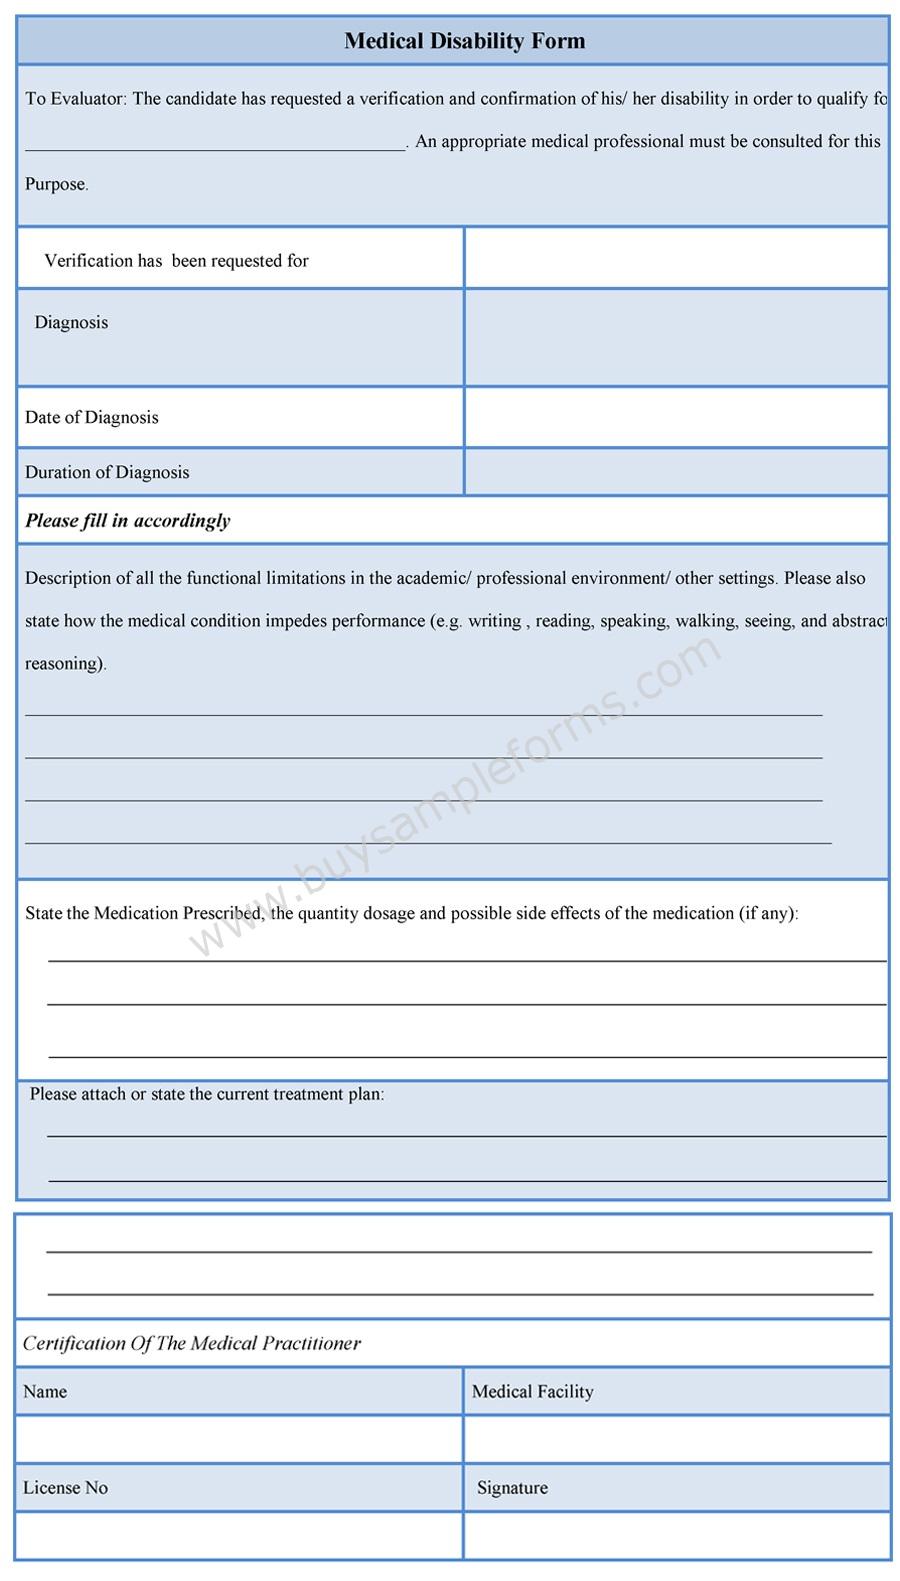 Medical Disability Form